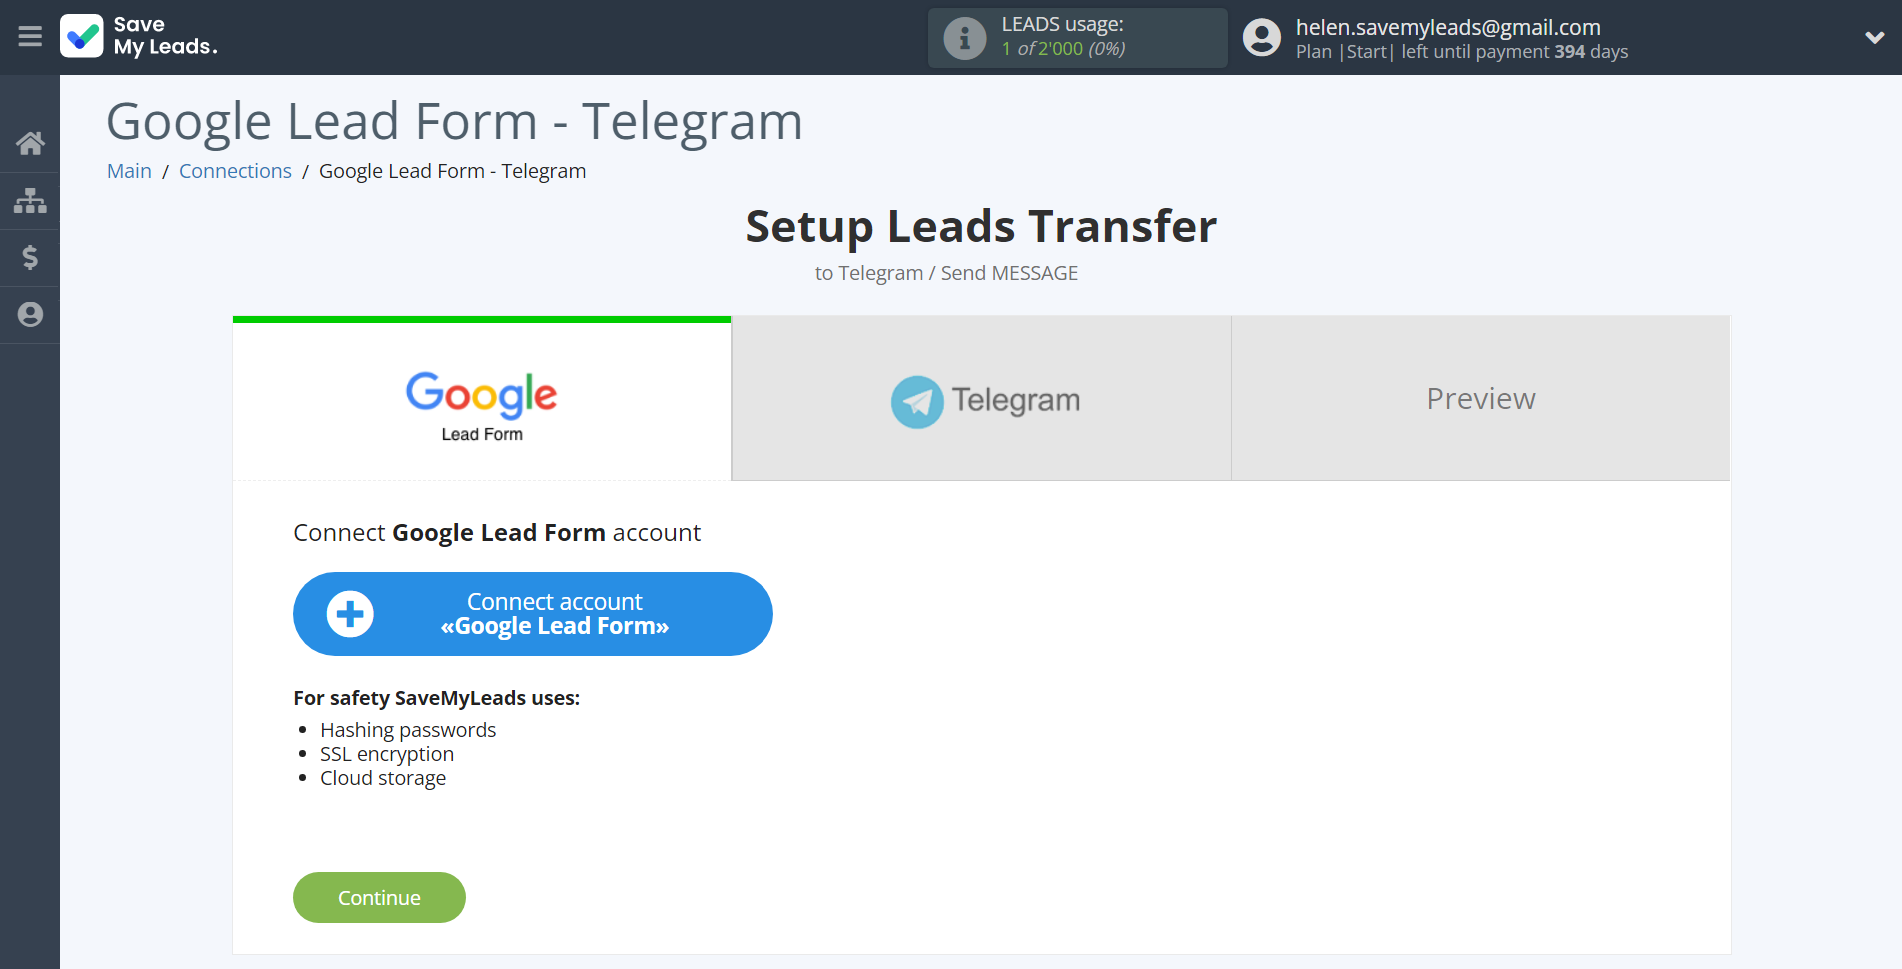 How to Connect Google Lead Form with Telegram | Data Source account